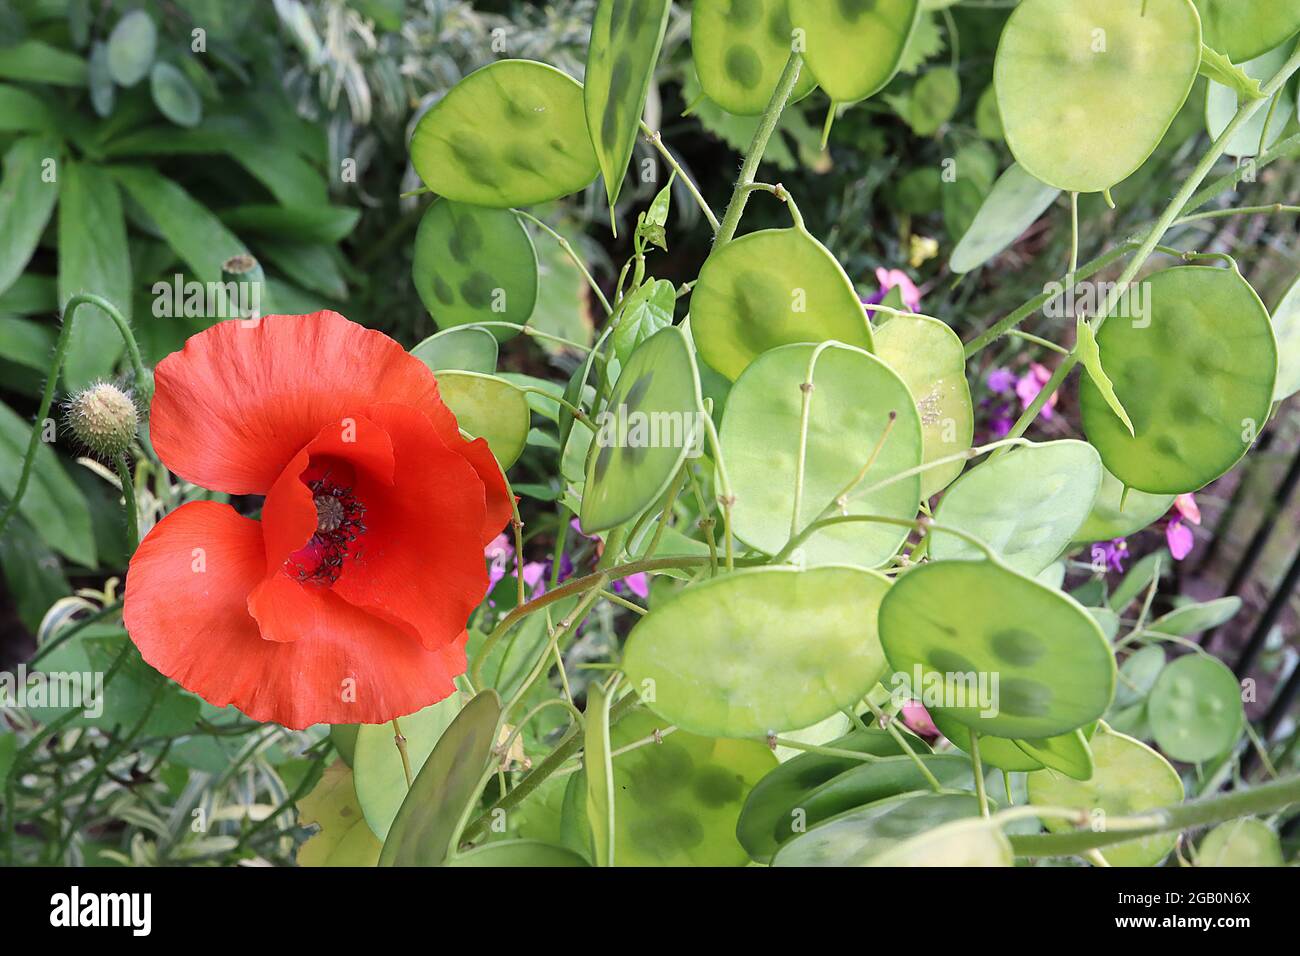 Papaver rhoeas common poppy – red flowers with creased petals on hairy wiry stems,  June, England, UK Stock Photo